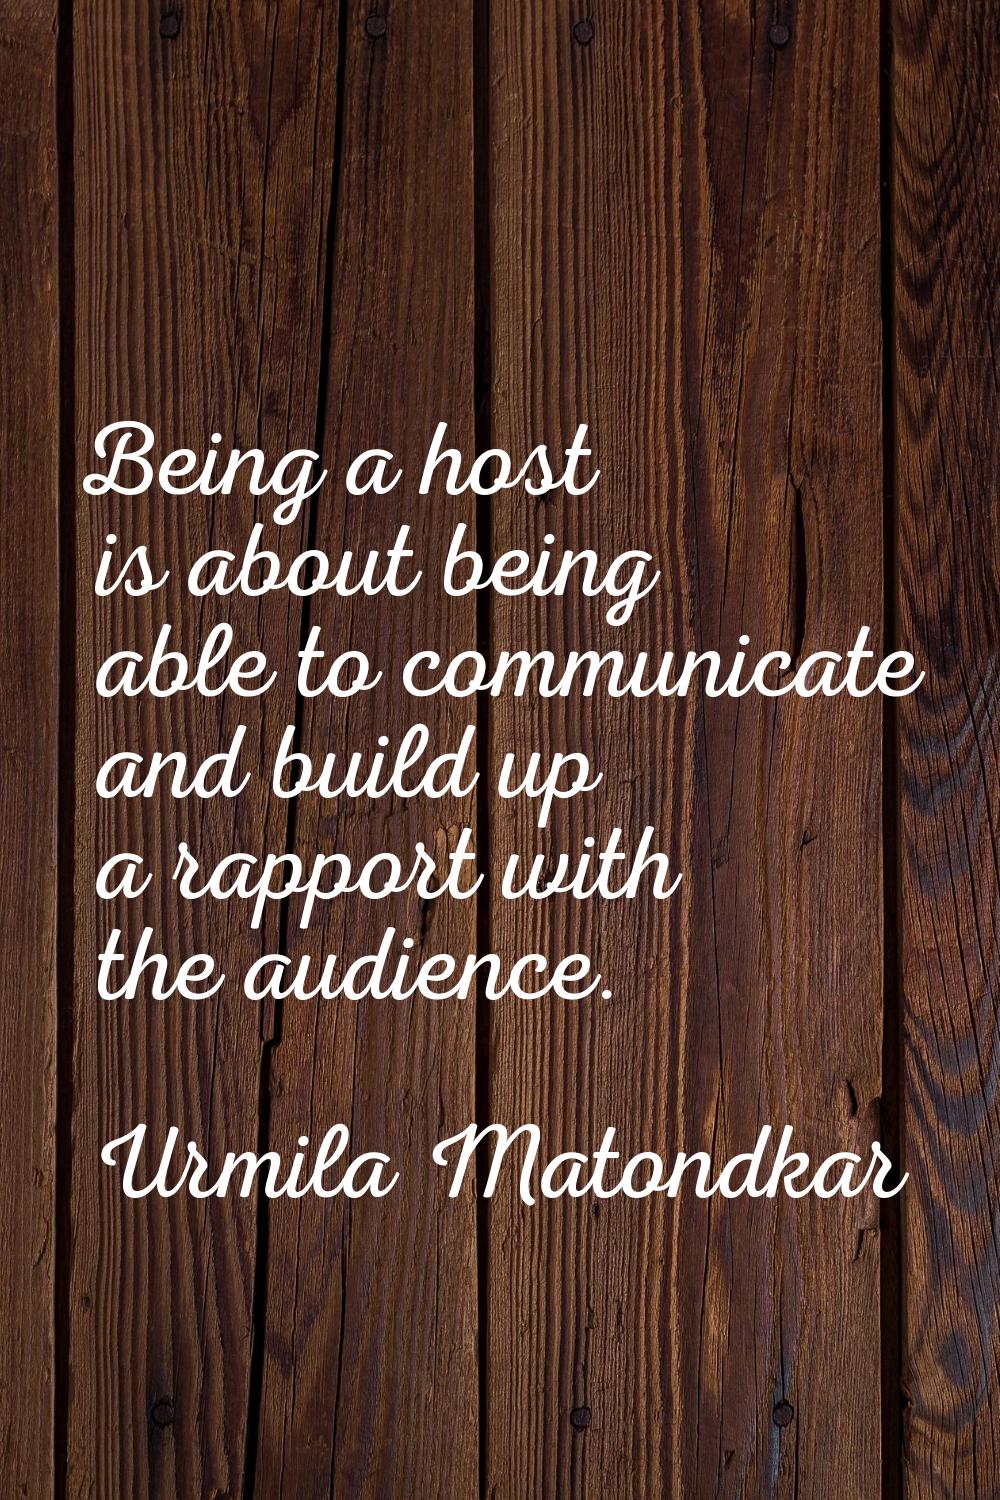 Being a host is about being able to communicate and build up a rapport with the audience.